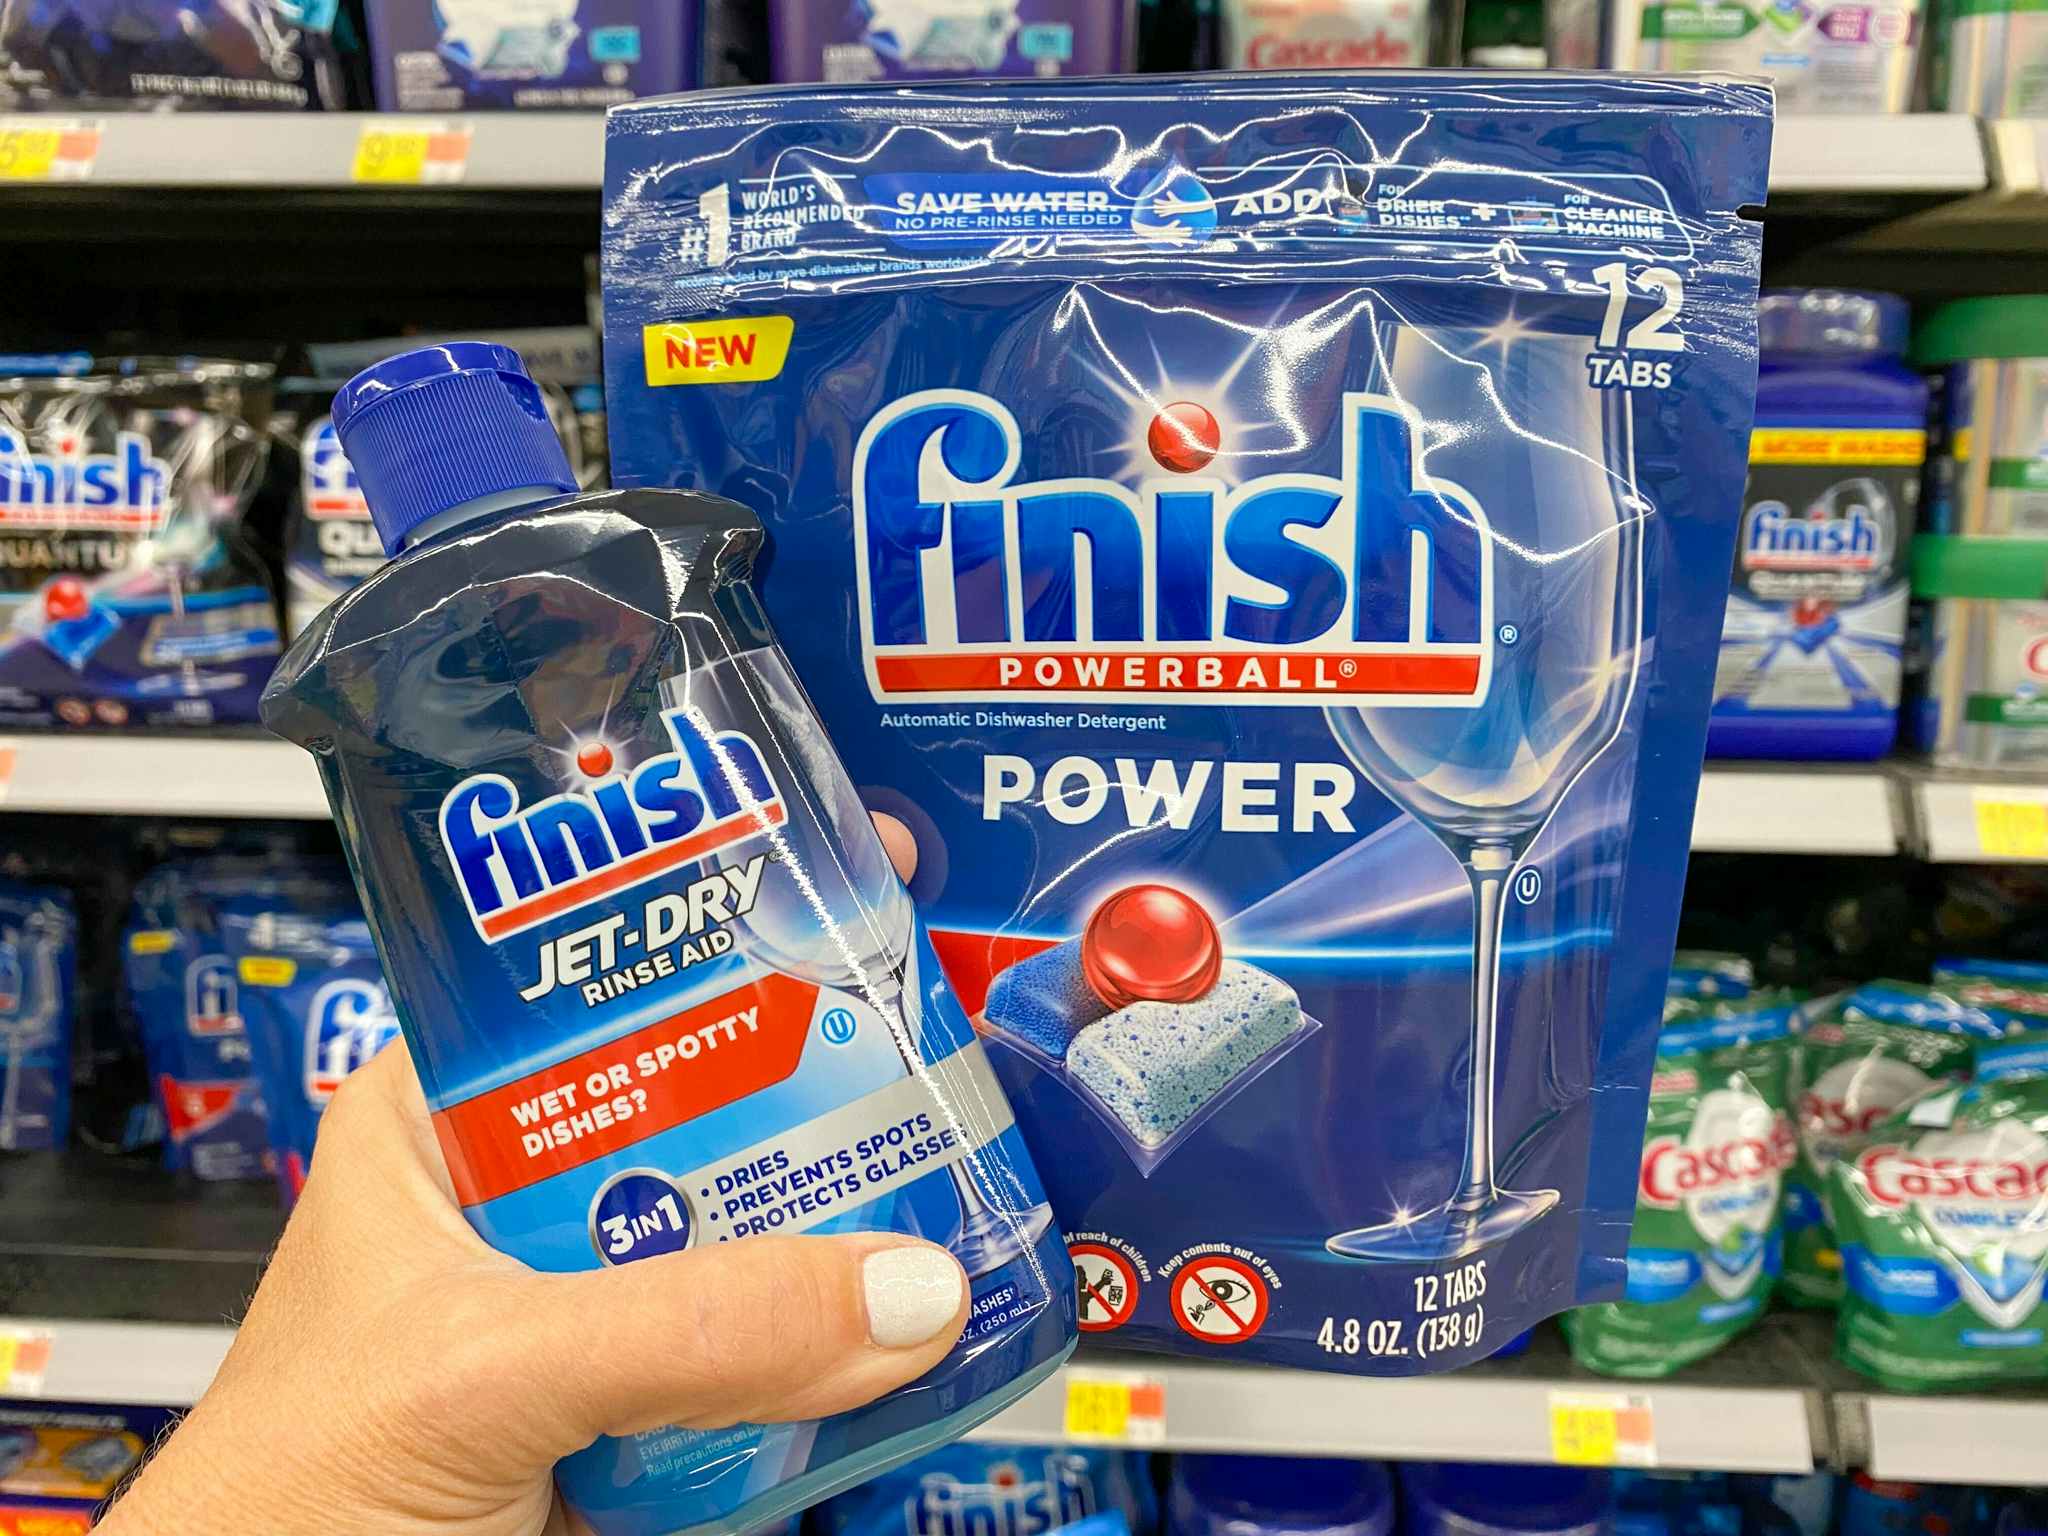 Finish Powerball Tabs and Finish Jet Dry products held in cleaning aisle at Walmart